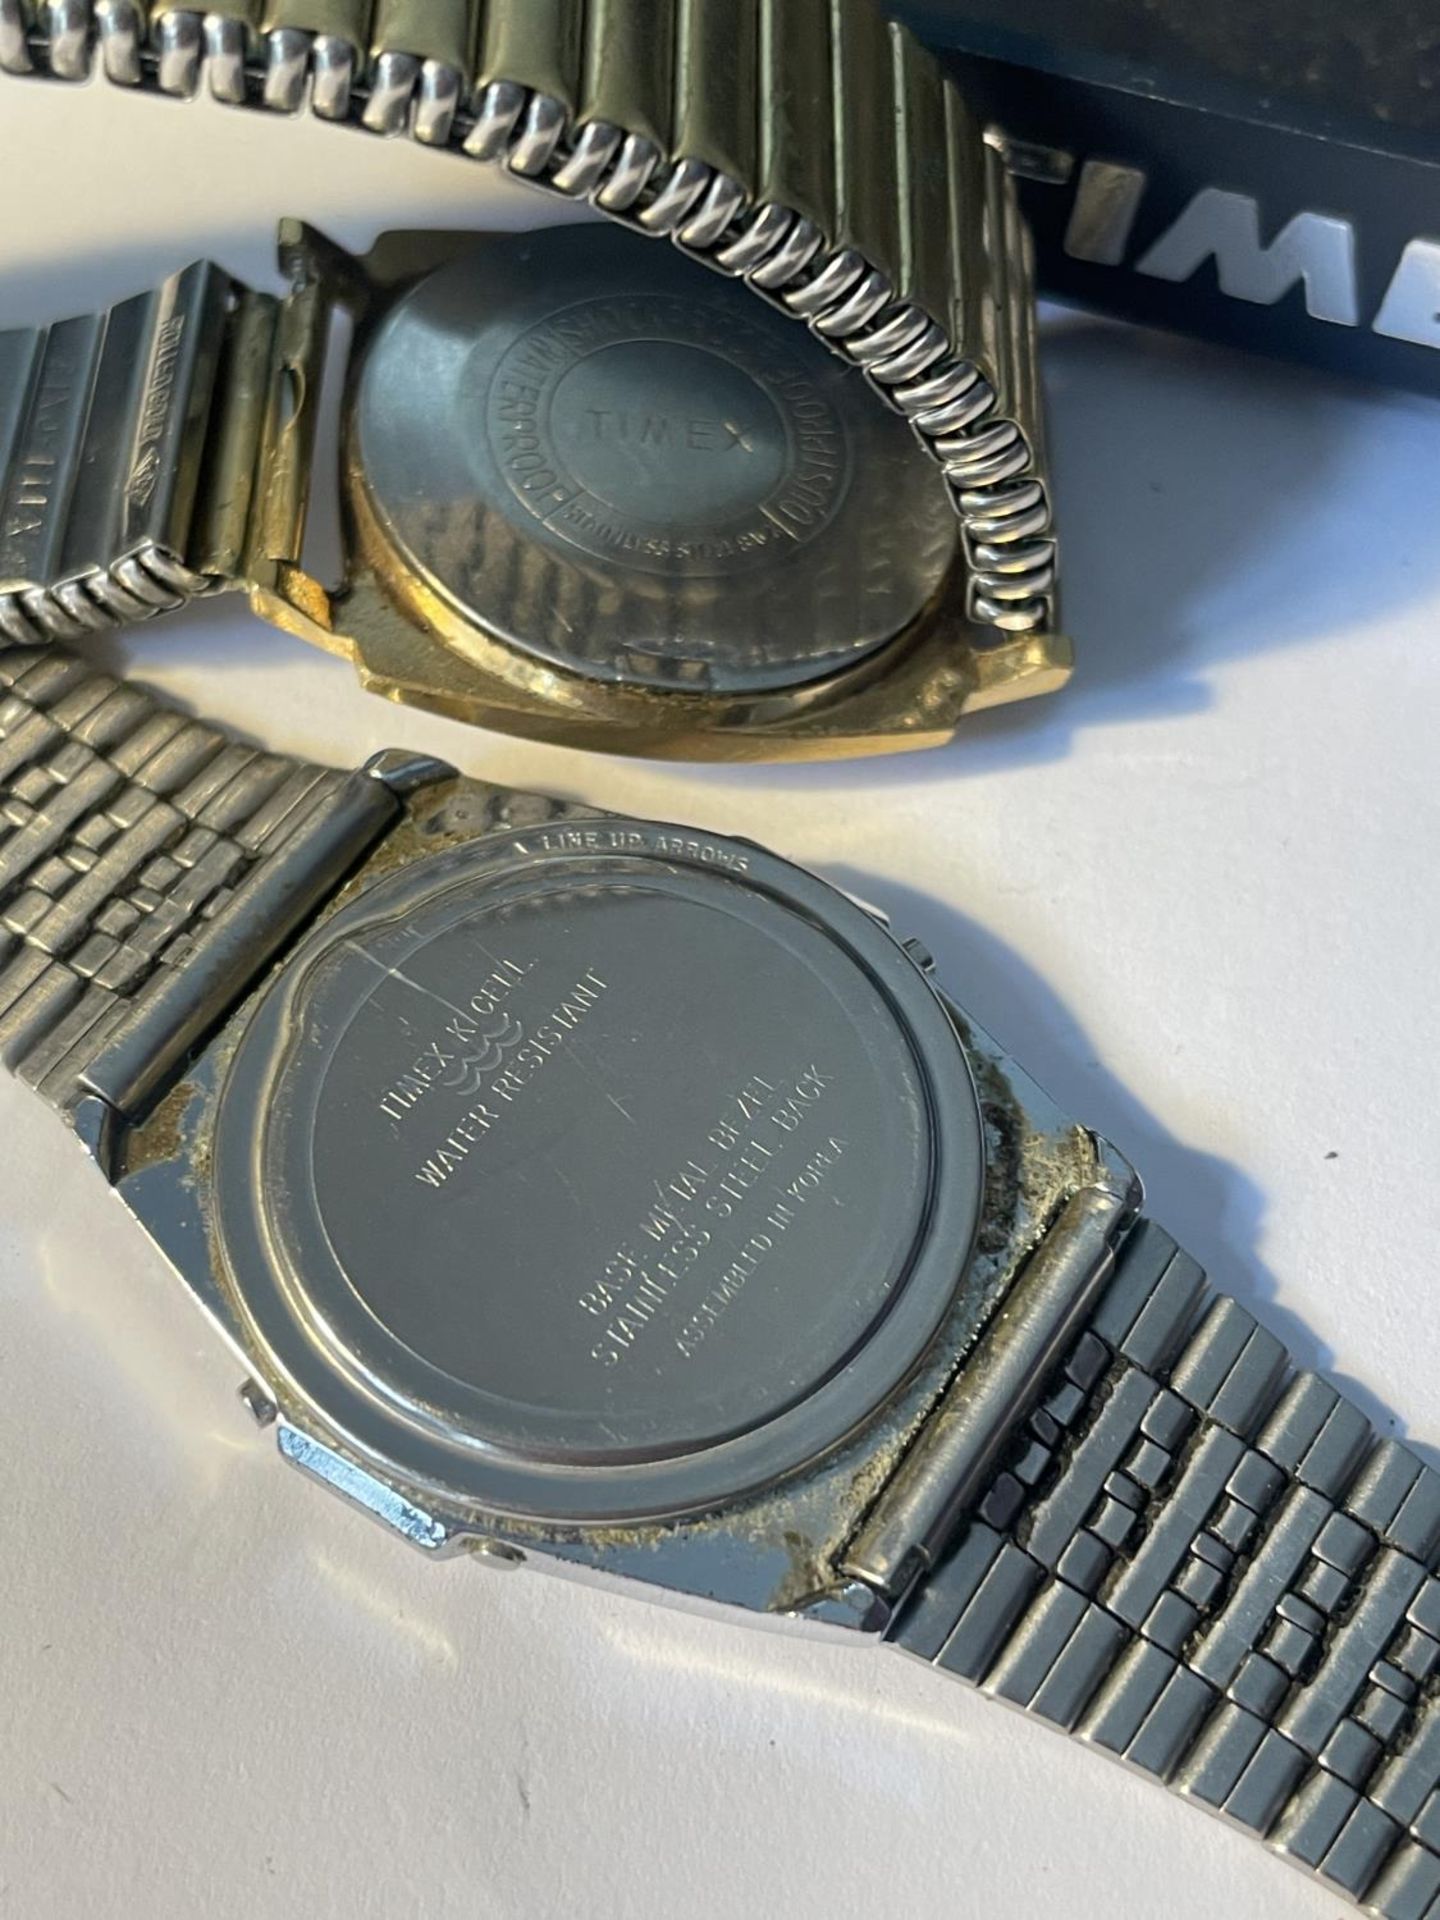 TWO VINTAGE TIMEX WATCHES TO INCLUDE A DIGITAL AND A PRESENTATION BOX - Image 4 of 4